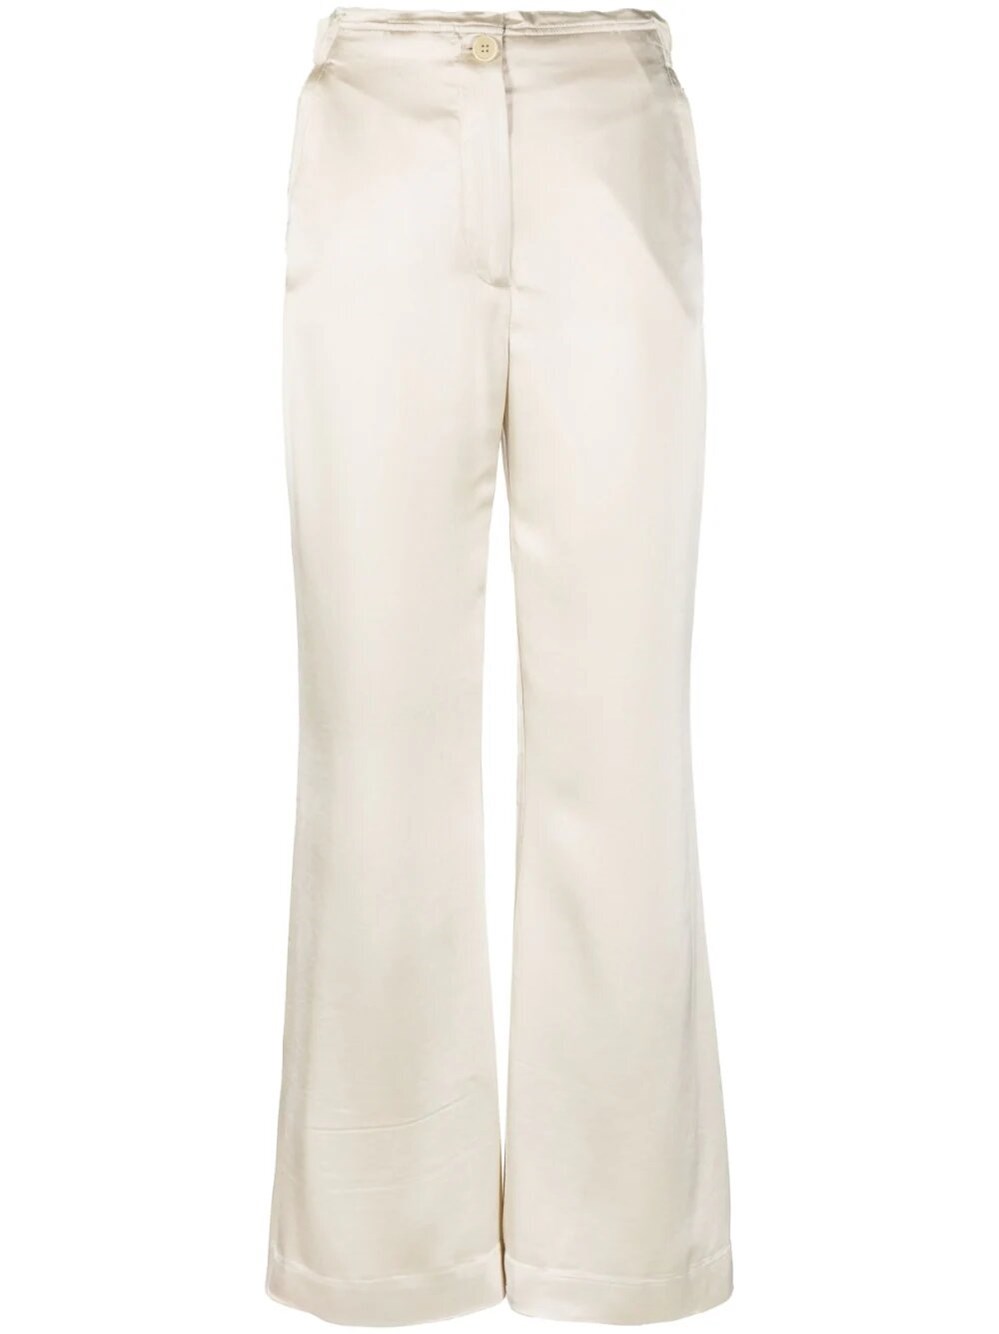 BY MALENE BIRGER AMORES TROUSERS